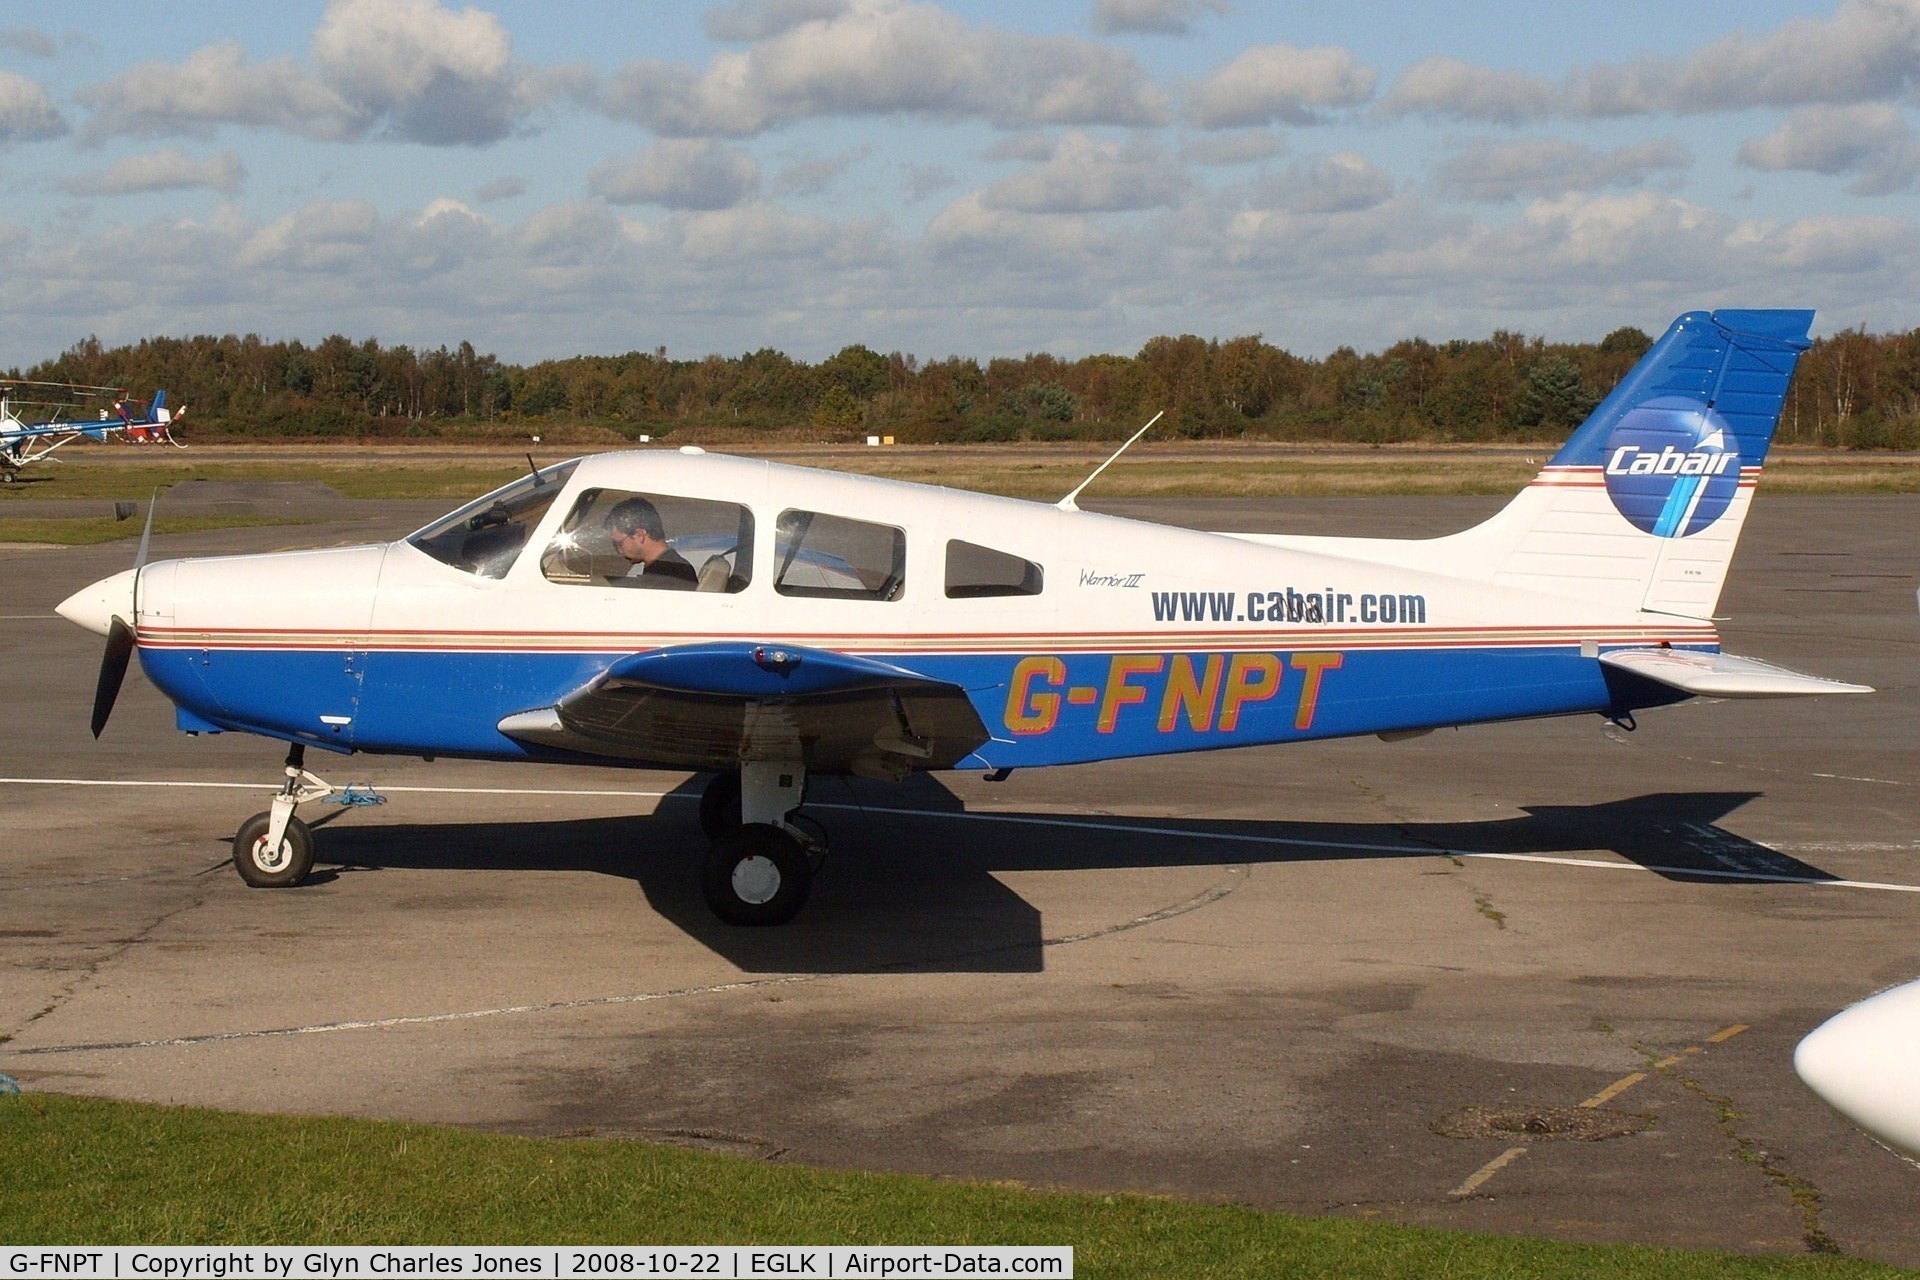 G-FNPT, 2002 Piper PA-28-161 Warrior III C/N 2842163, Previously N5346Y. Operated by Cabair.